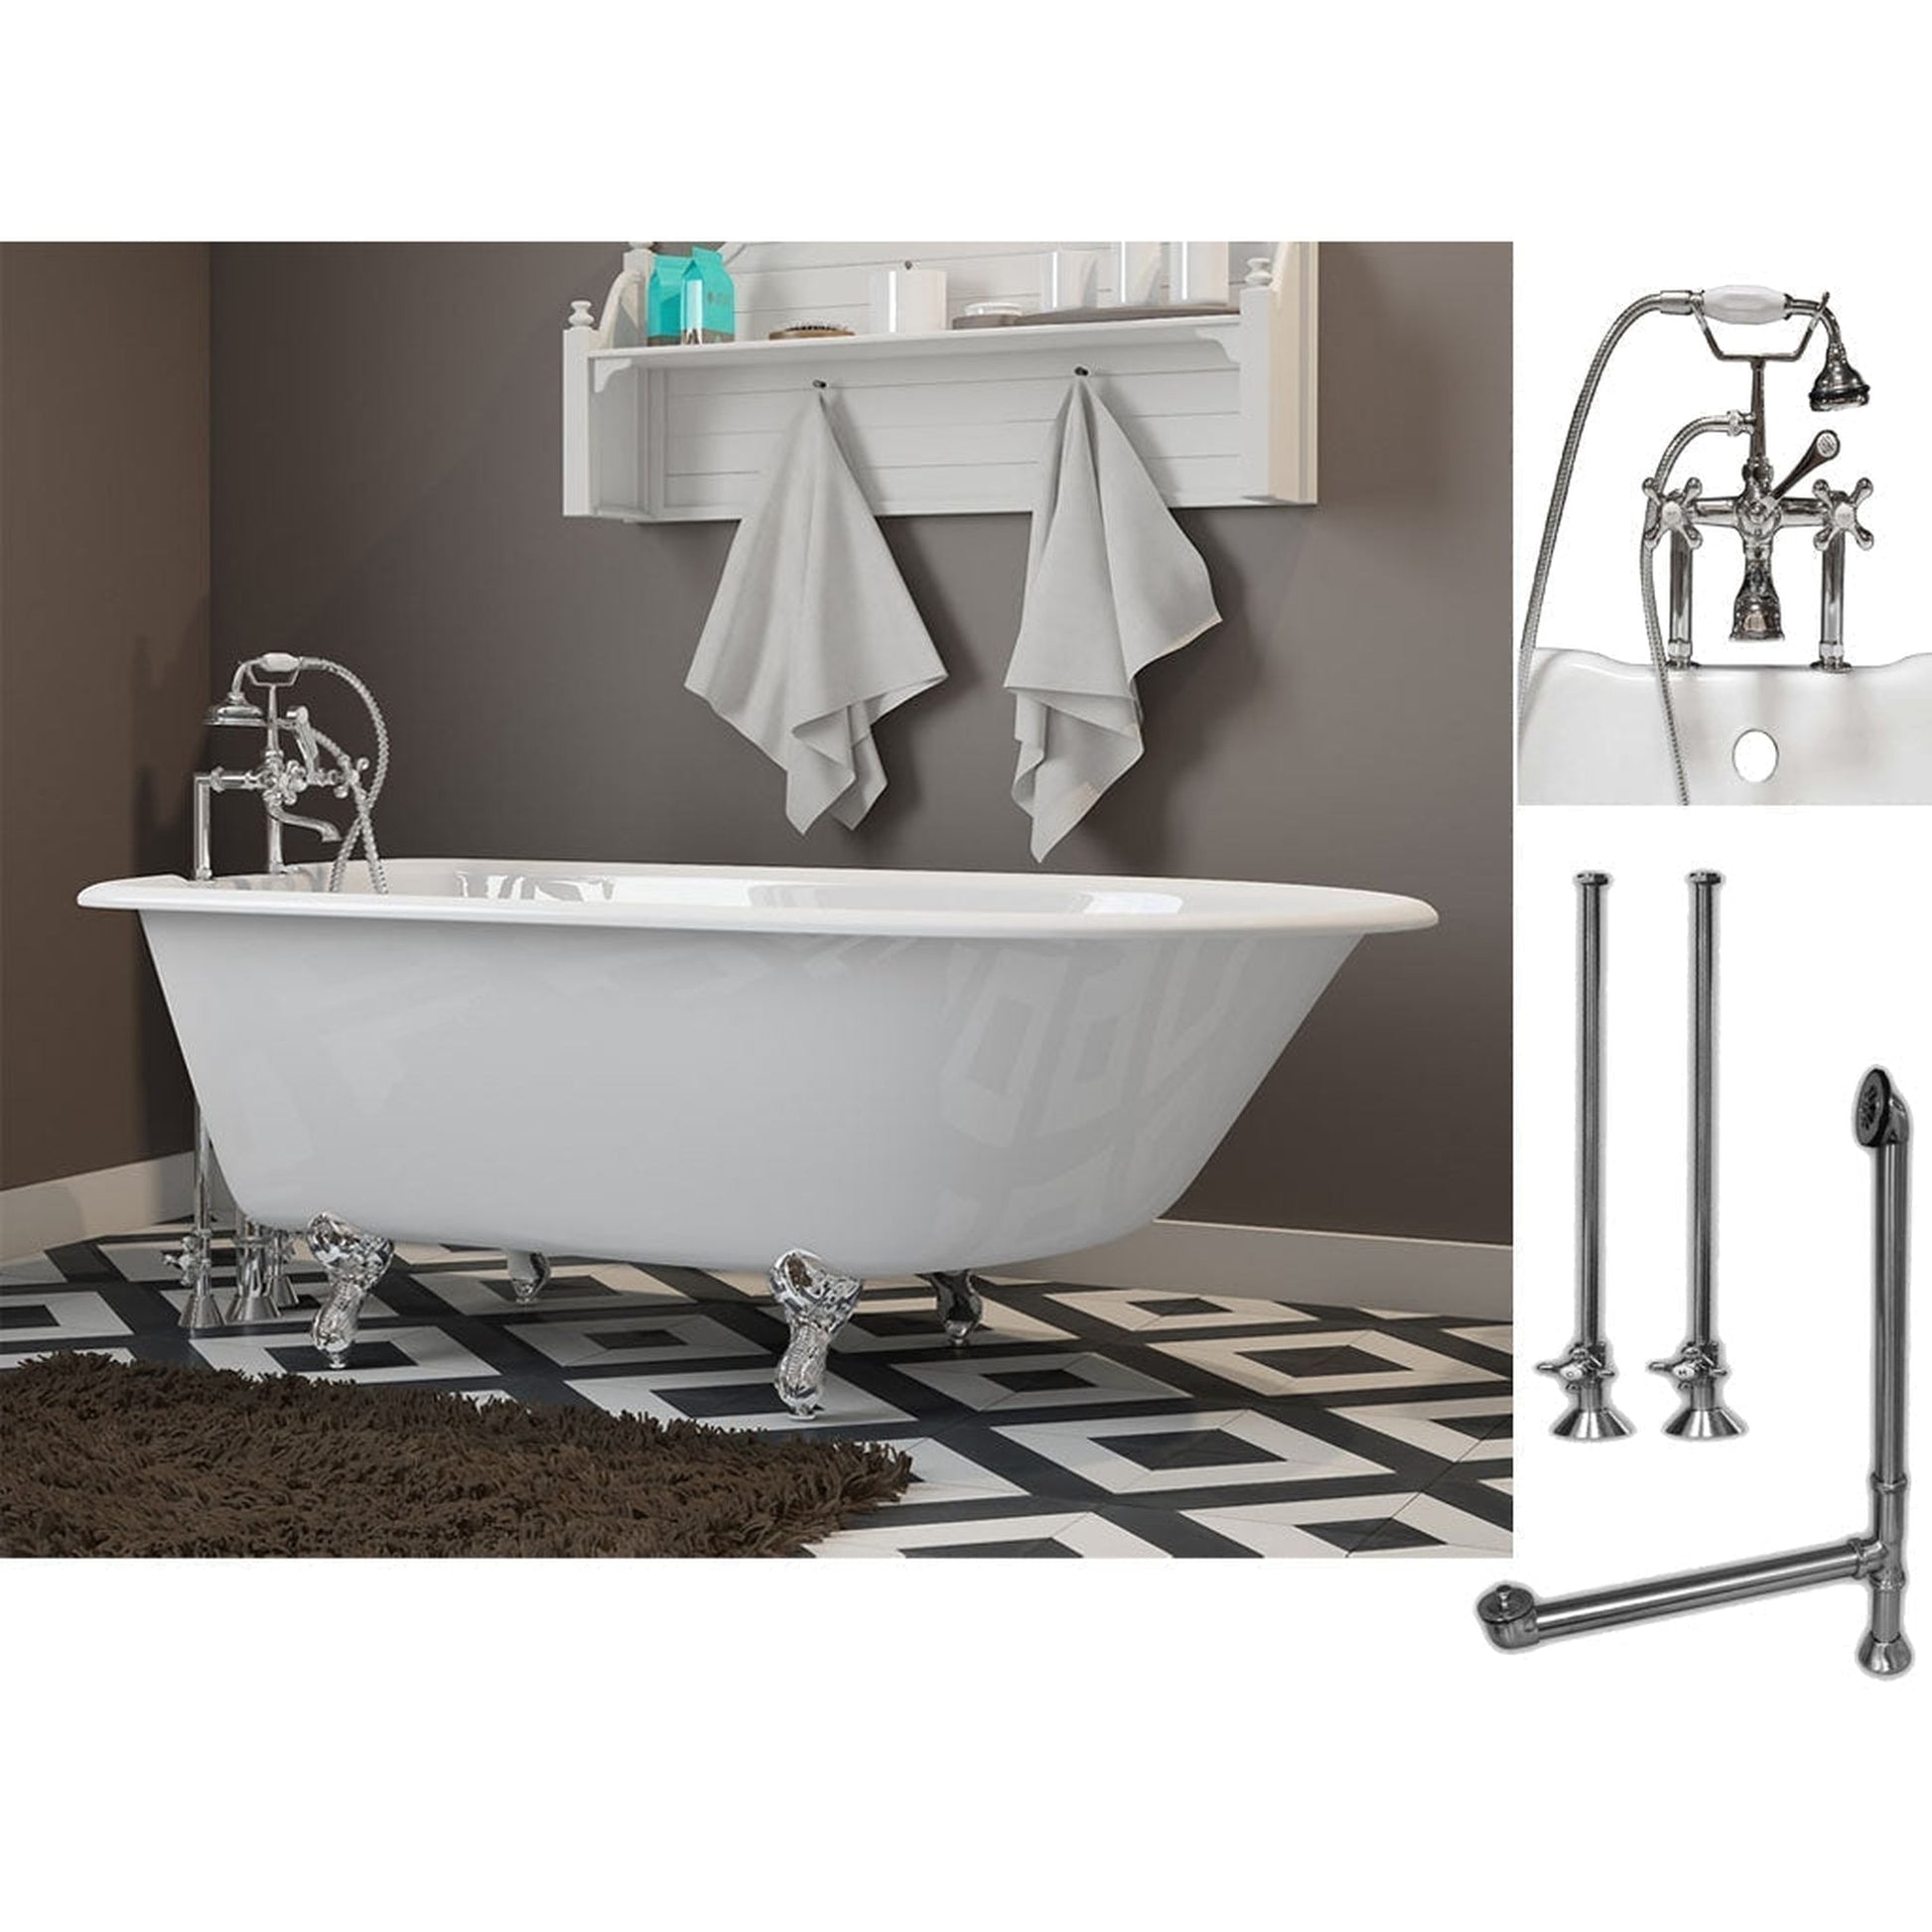 Cambridge Plumbing 60" White Cast Iron Rolled Rim Clawfoot Bathtub With Deck Holes And Complete Plumbing Package Including 6” Riser Deck Mount Faucet, Supply Lines, Drain And Overflow Assembly In Polished Chrome